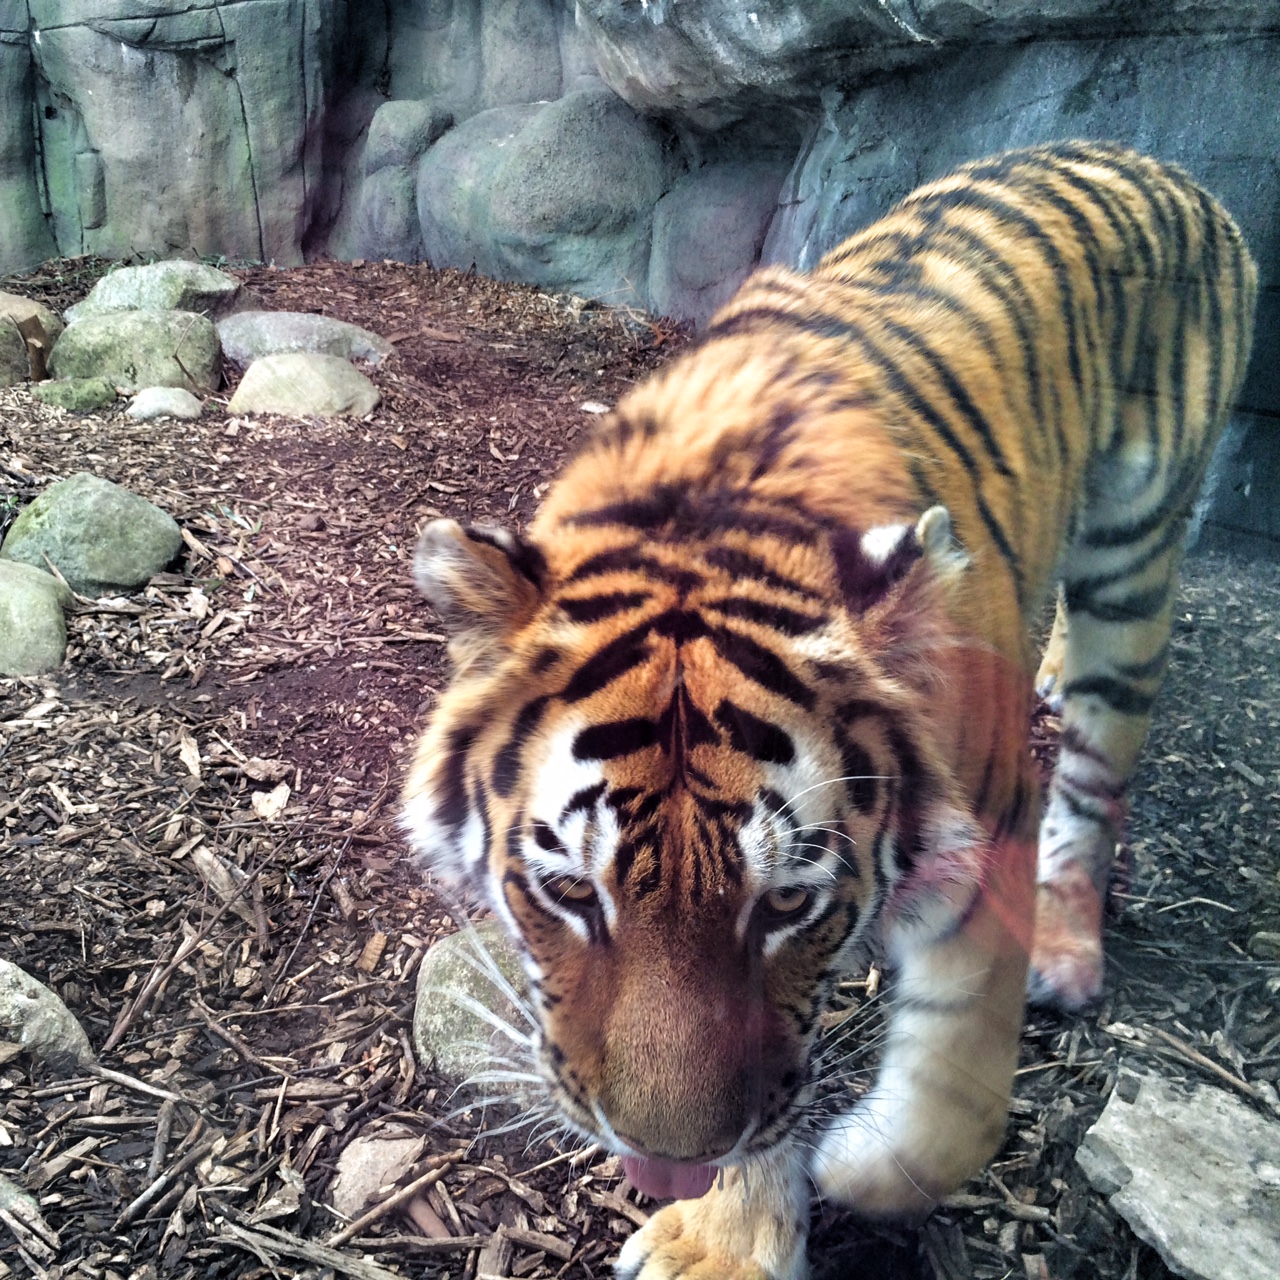 things to do with kids in indianapolis - Indianapolis Zoo